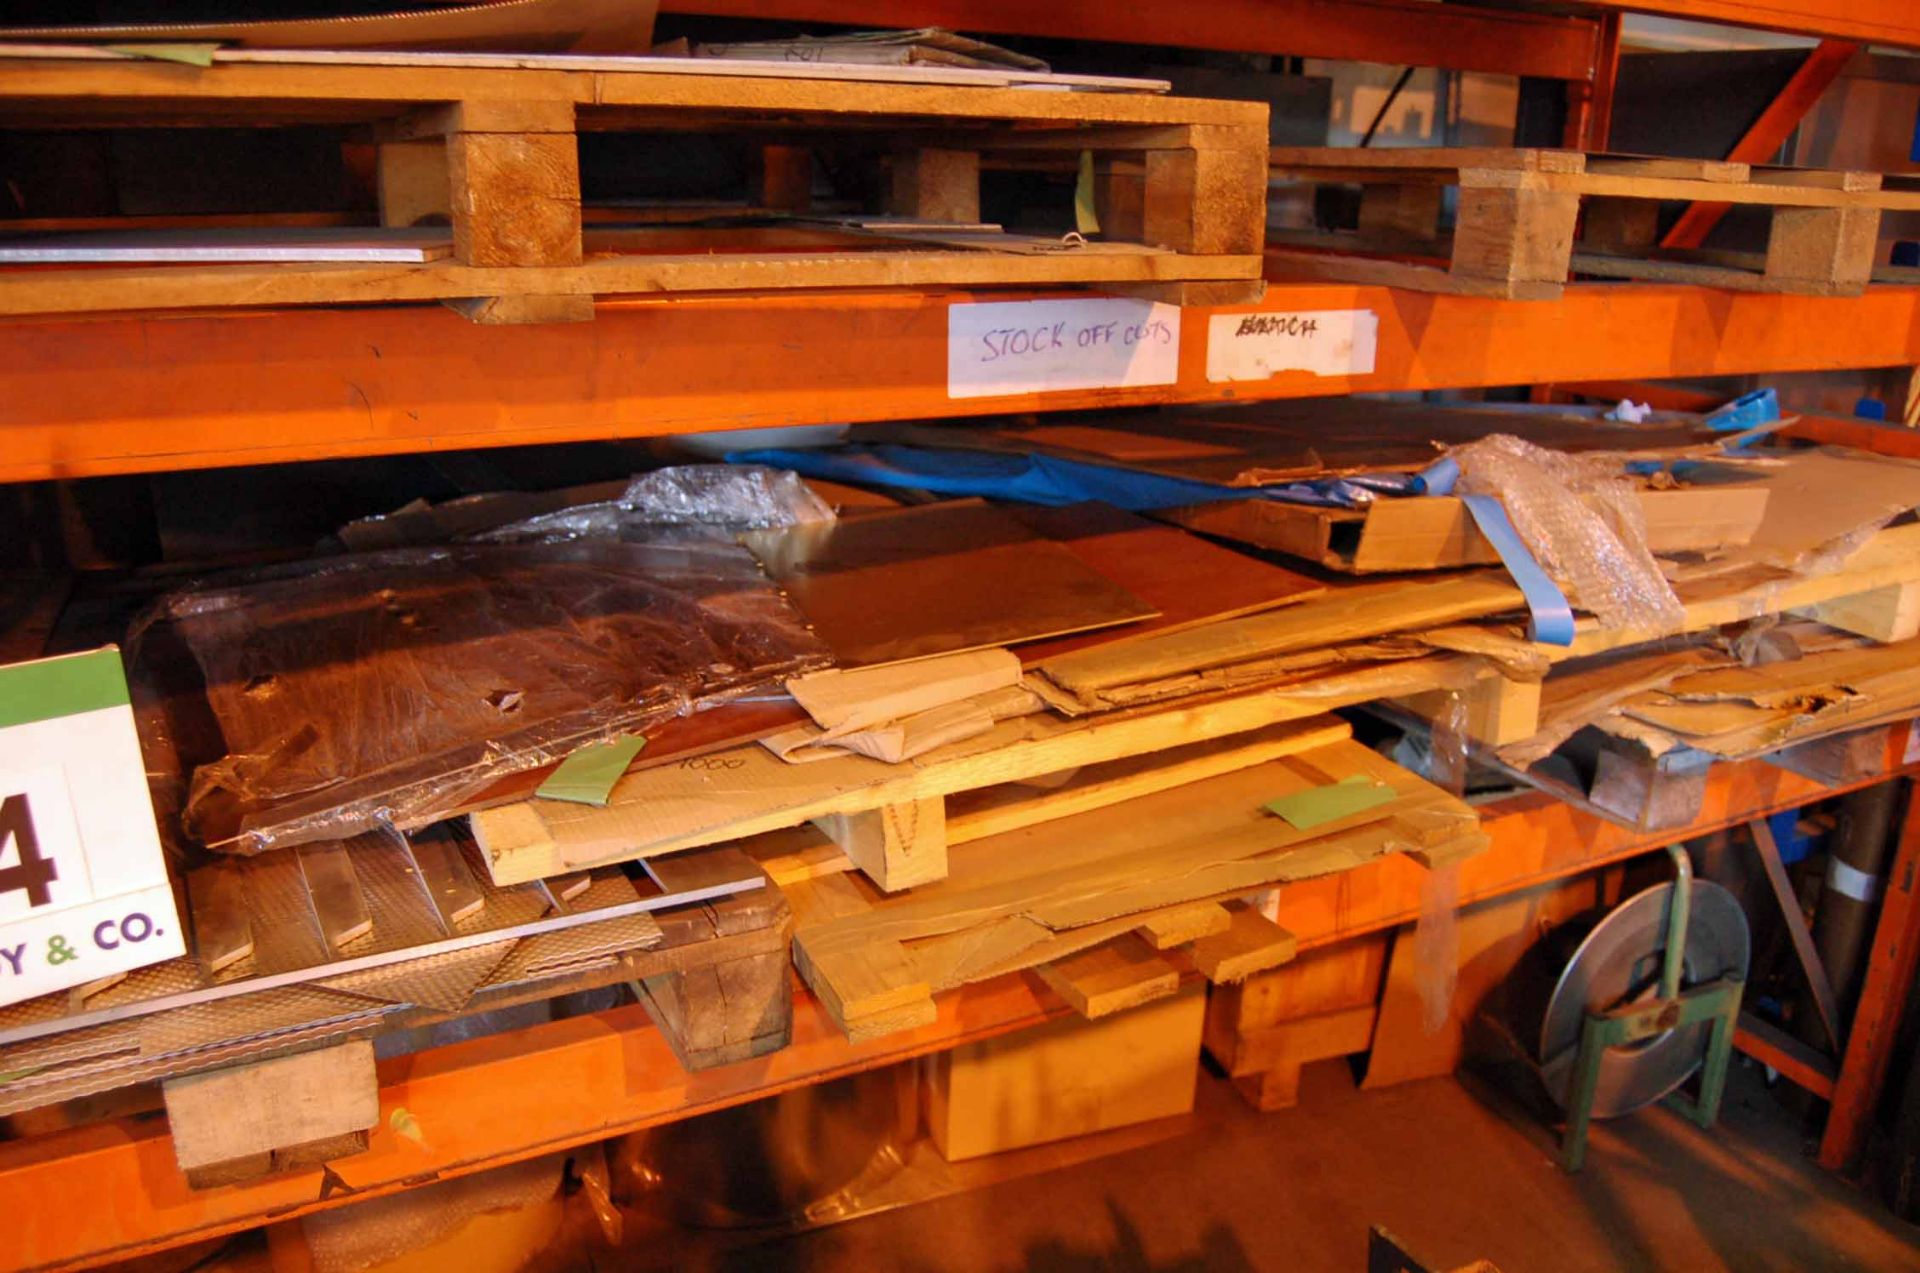 A Quantity of Sheet Materials Including Stainless Steel, Aluminium, Copper and Mild Steel (As - Image 7 of 8